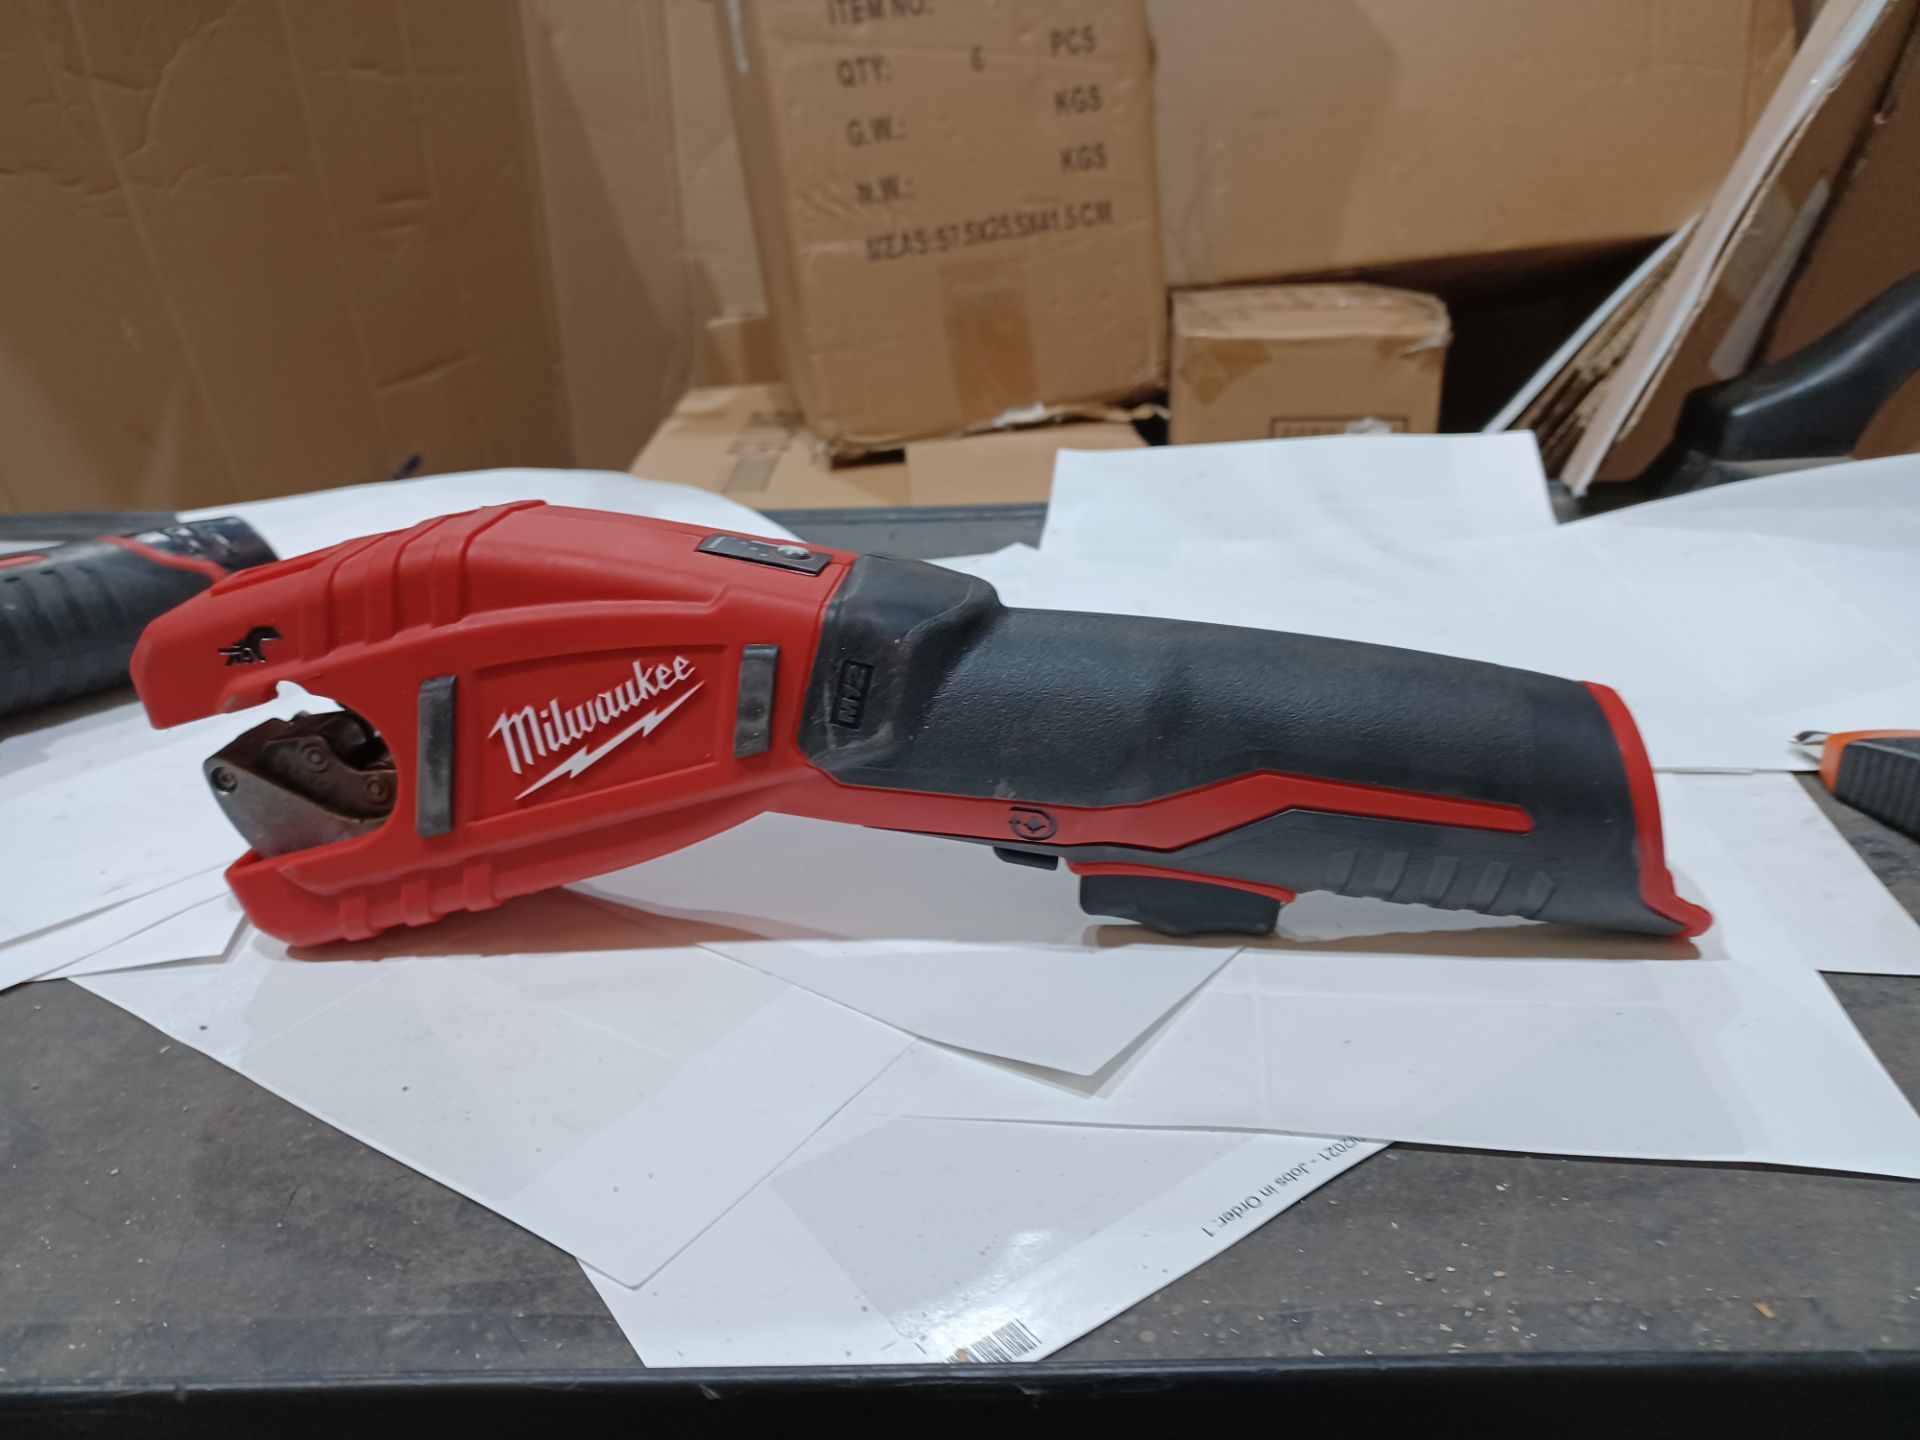 MILWAUKEE C12PC-201C 12V 2.0AH LI-ION REDLITHIUM CORDLESS PIPE CUTTER UNCHECKED/UNTESTED - PCK